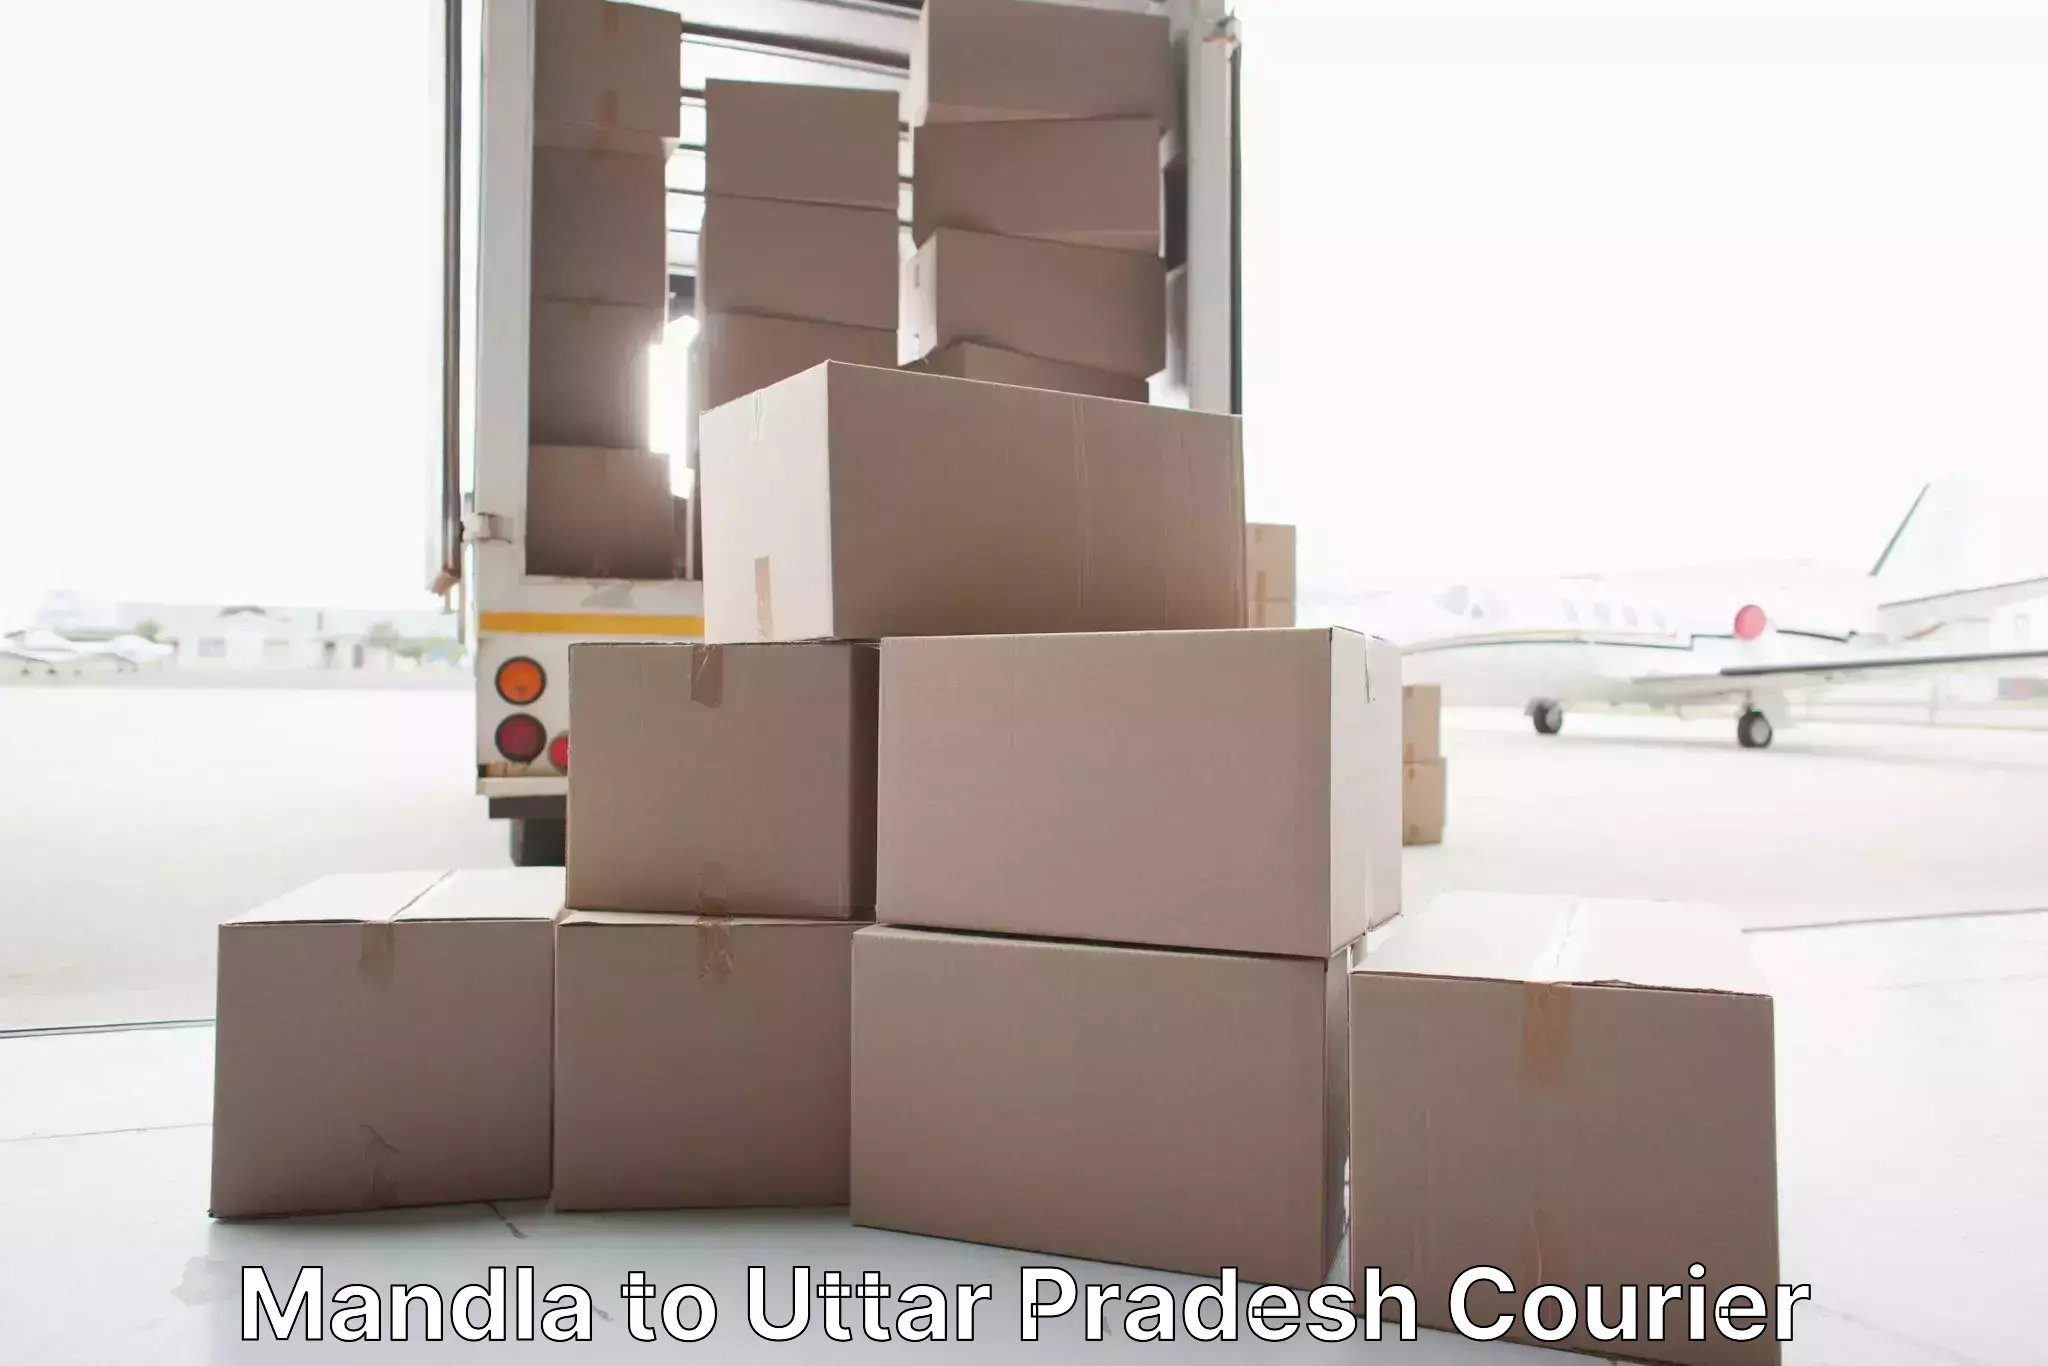 Reliable relocation services Mandla to Kanpur